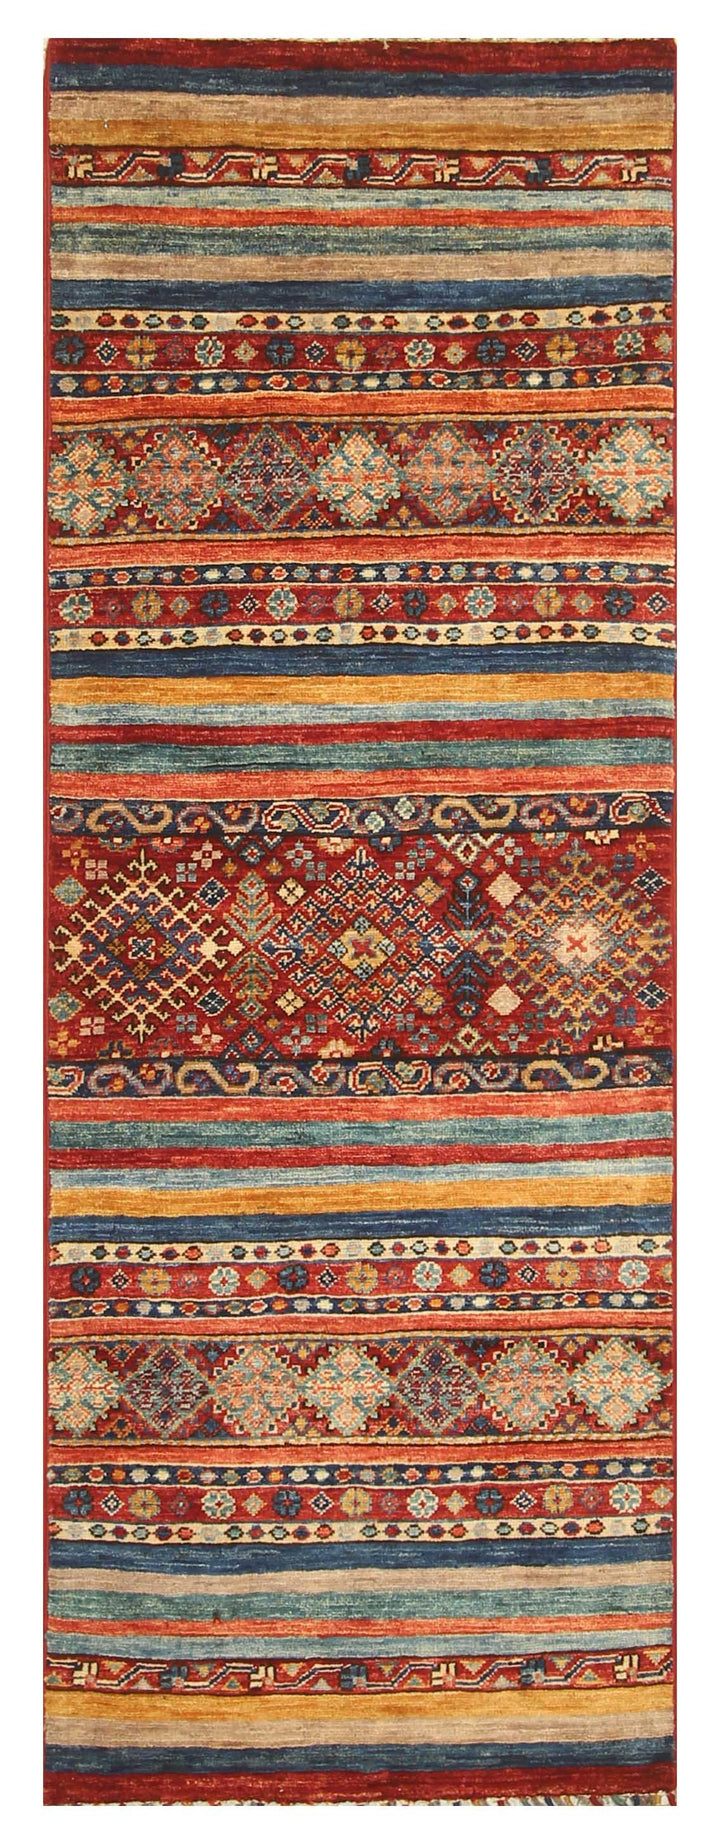 SOLD 6 ft Tribal Red Multicolor Afghan hand knotted Narrow Runner Rug